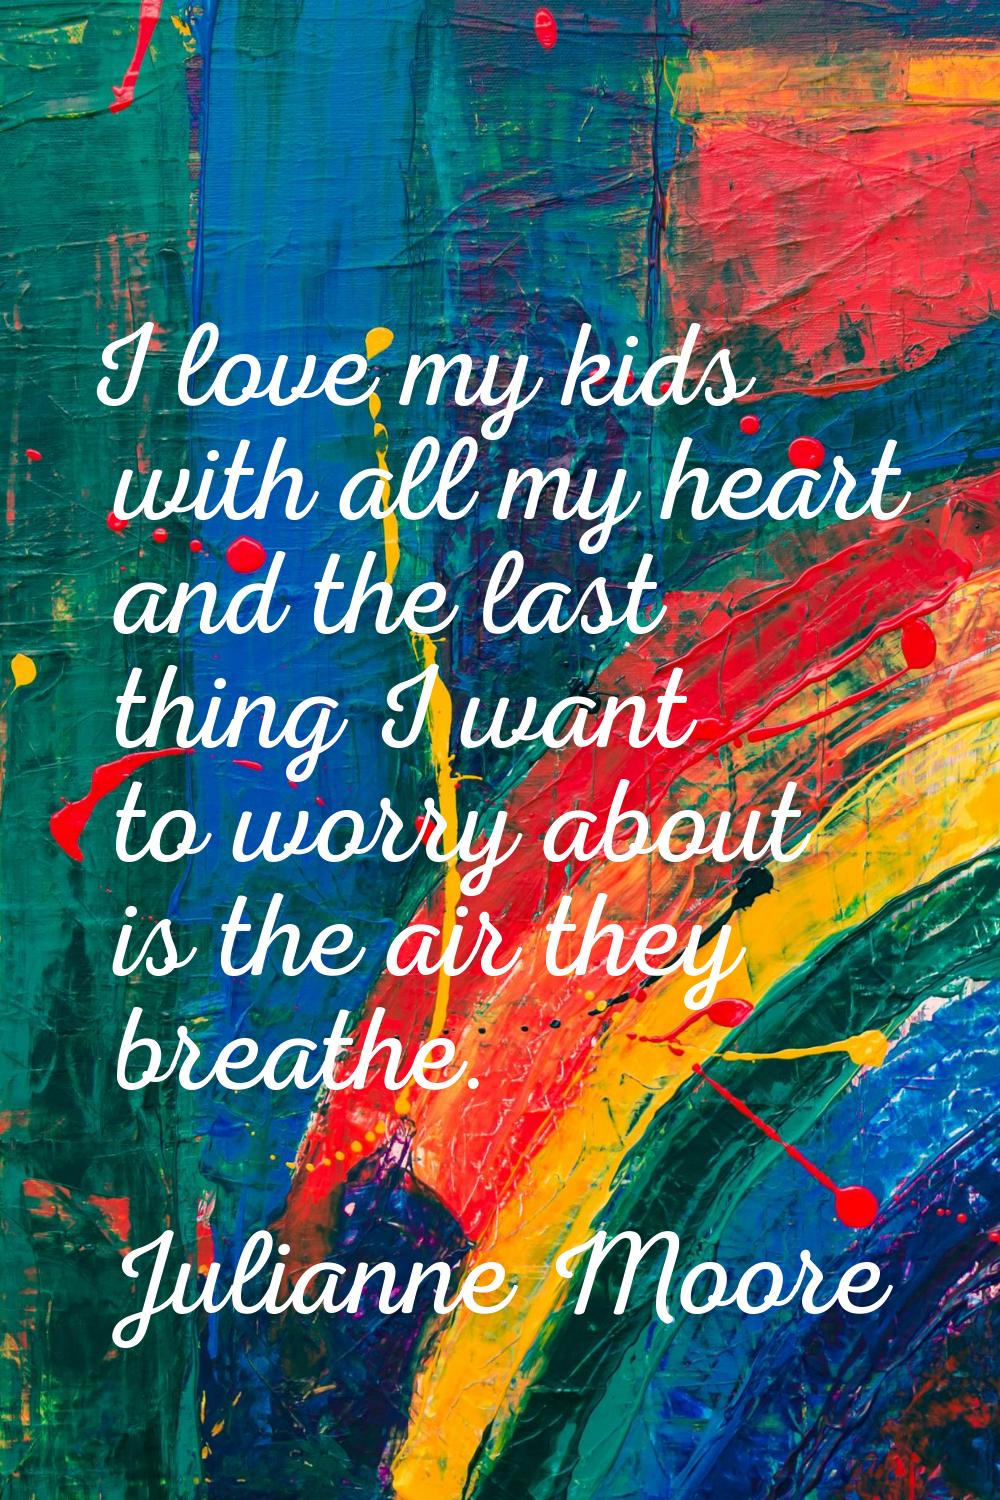 I love my kids with all my heart and the last thing I want to worry about is the air they breathe.